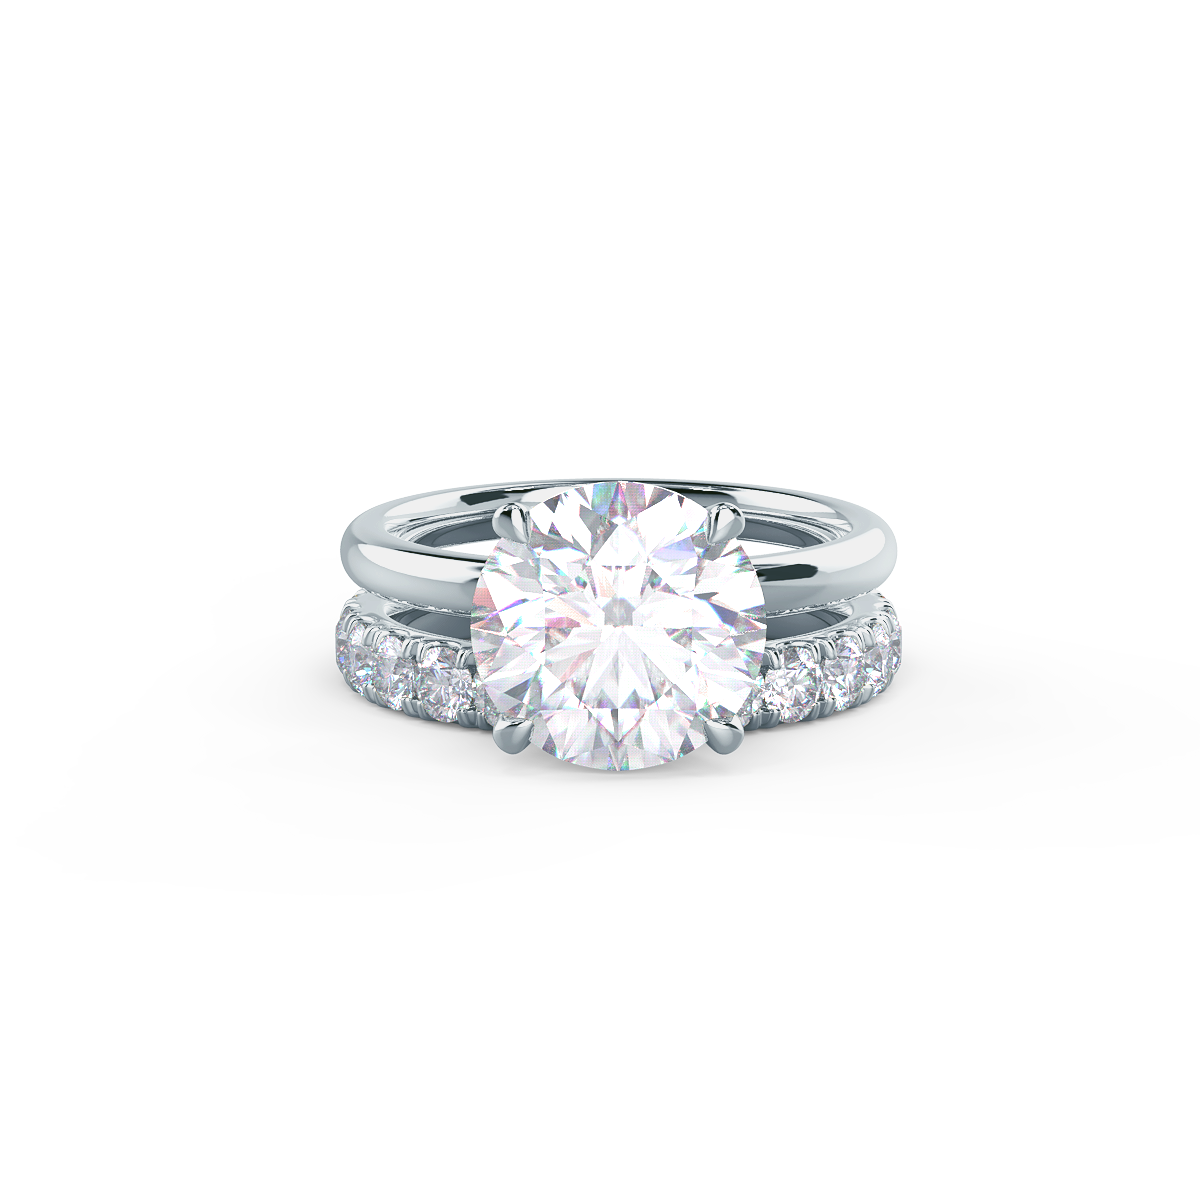   This setting pairs with a wide variety of wedding band styles.     View Wedding Band Details   